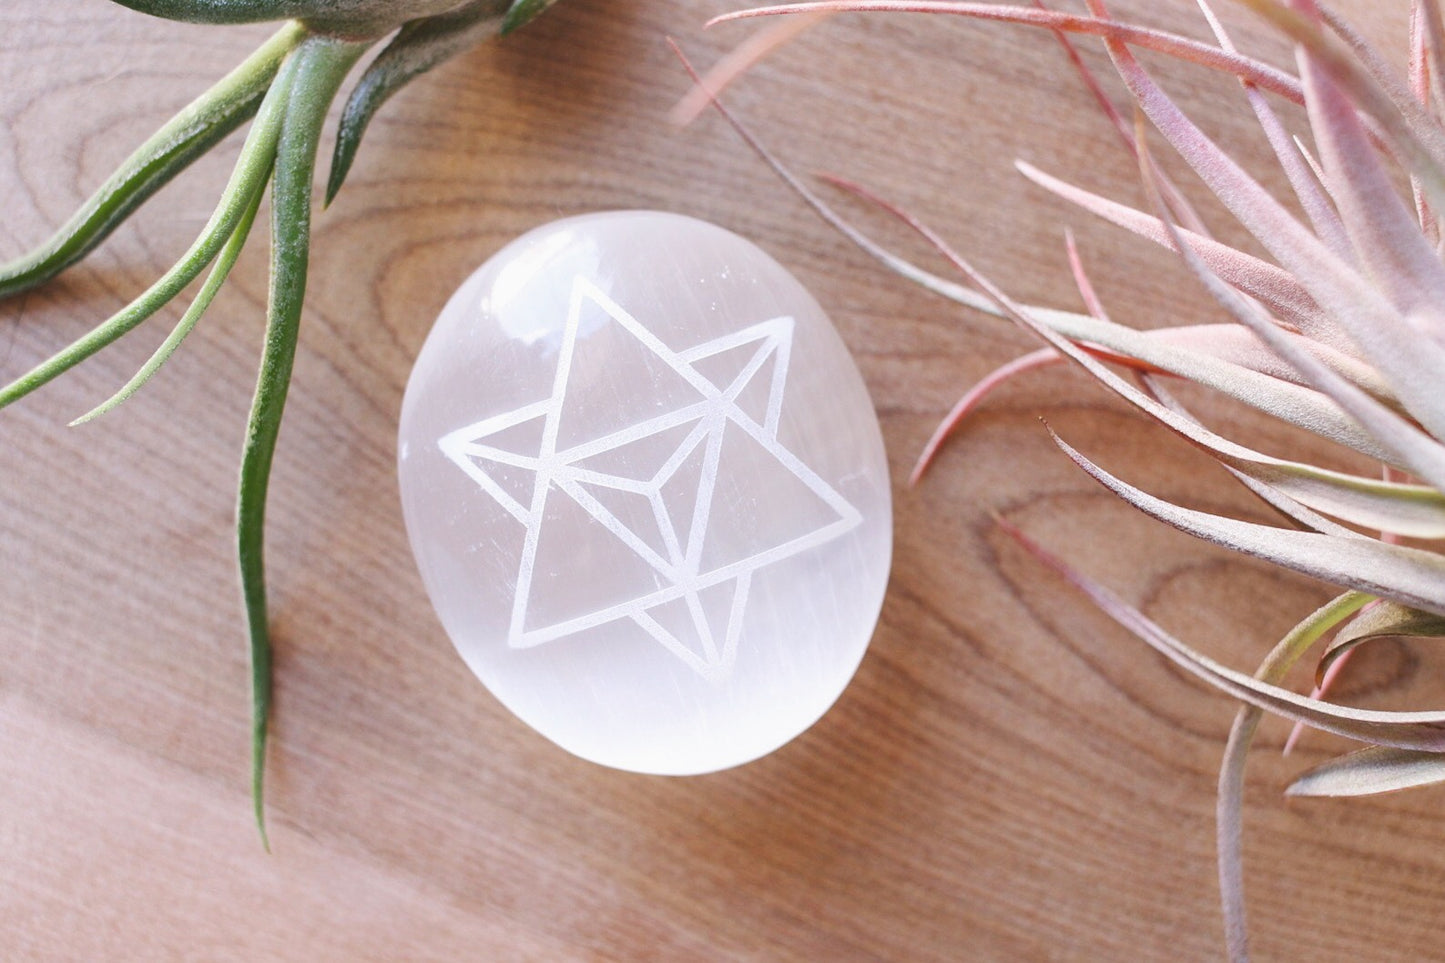 Etched Selenite Palmstone "Merkaba" *CLEARANCE* 2ND QUALITY OR DAMAGED - FINAL SALE - Fractalista Designs